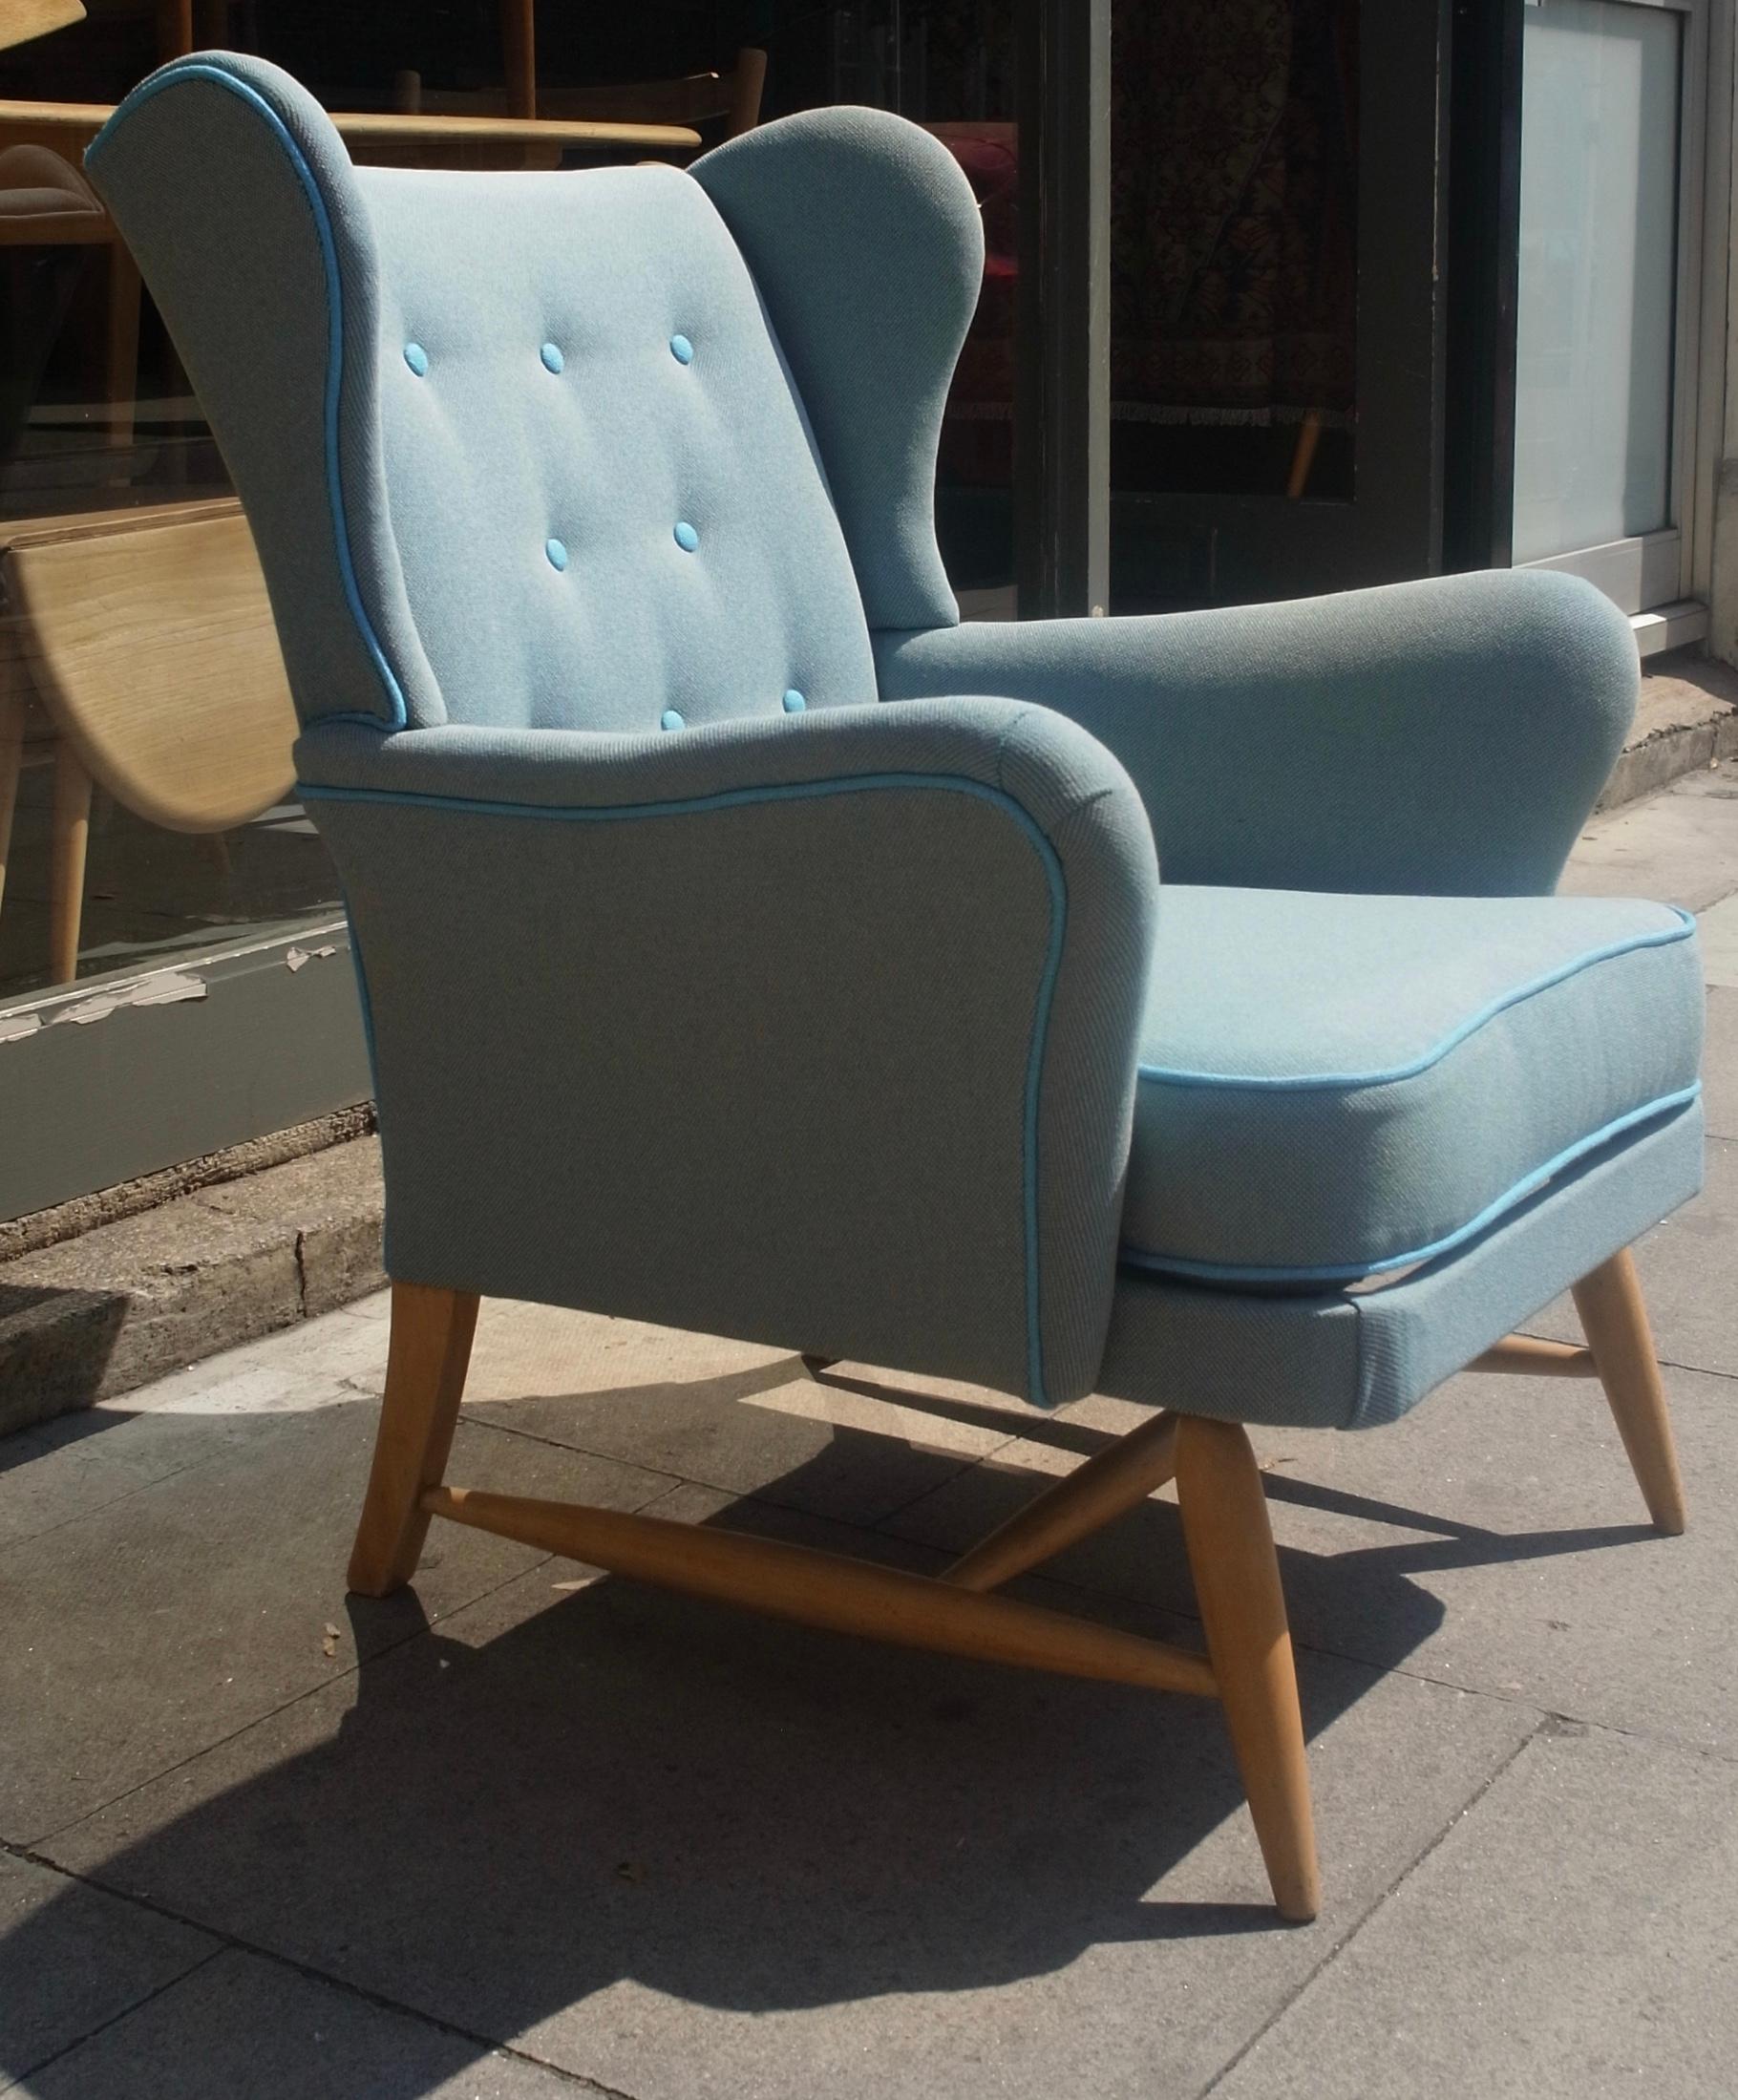 A very rare, comfortable and stylish vintage 1950s Ercol wingback armchair, newly reupholstered in a light blue 100% wool 'steel-cut' textile with a contrasting blue piping and buttons, on an external Beech framed base. This armchair is in excellent